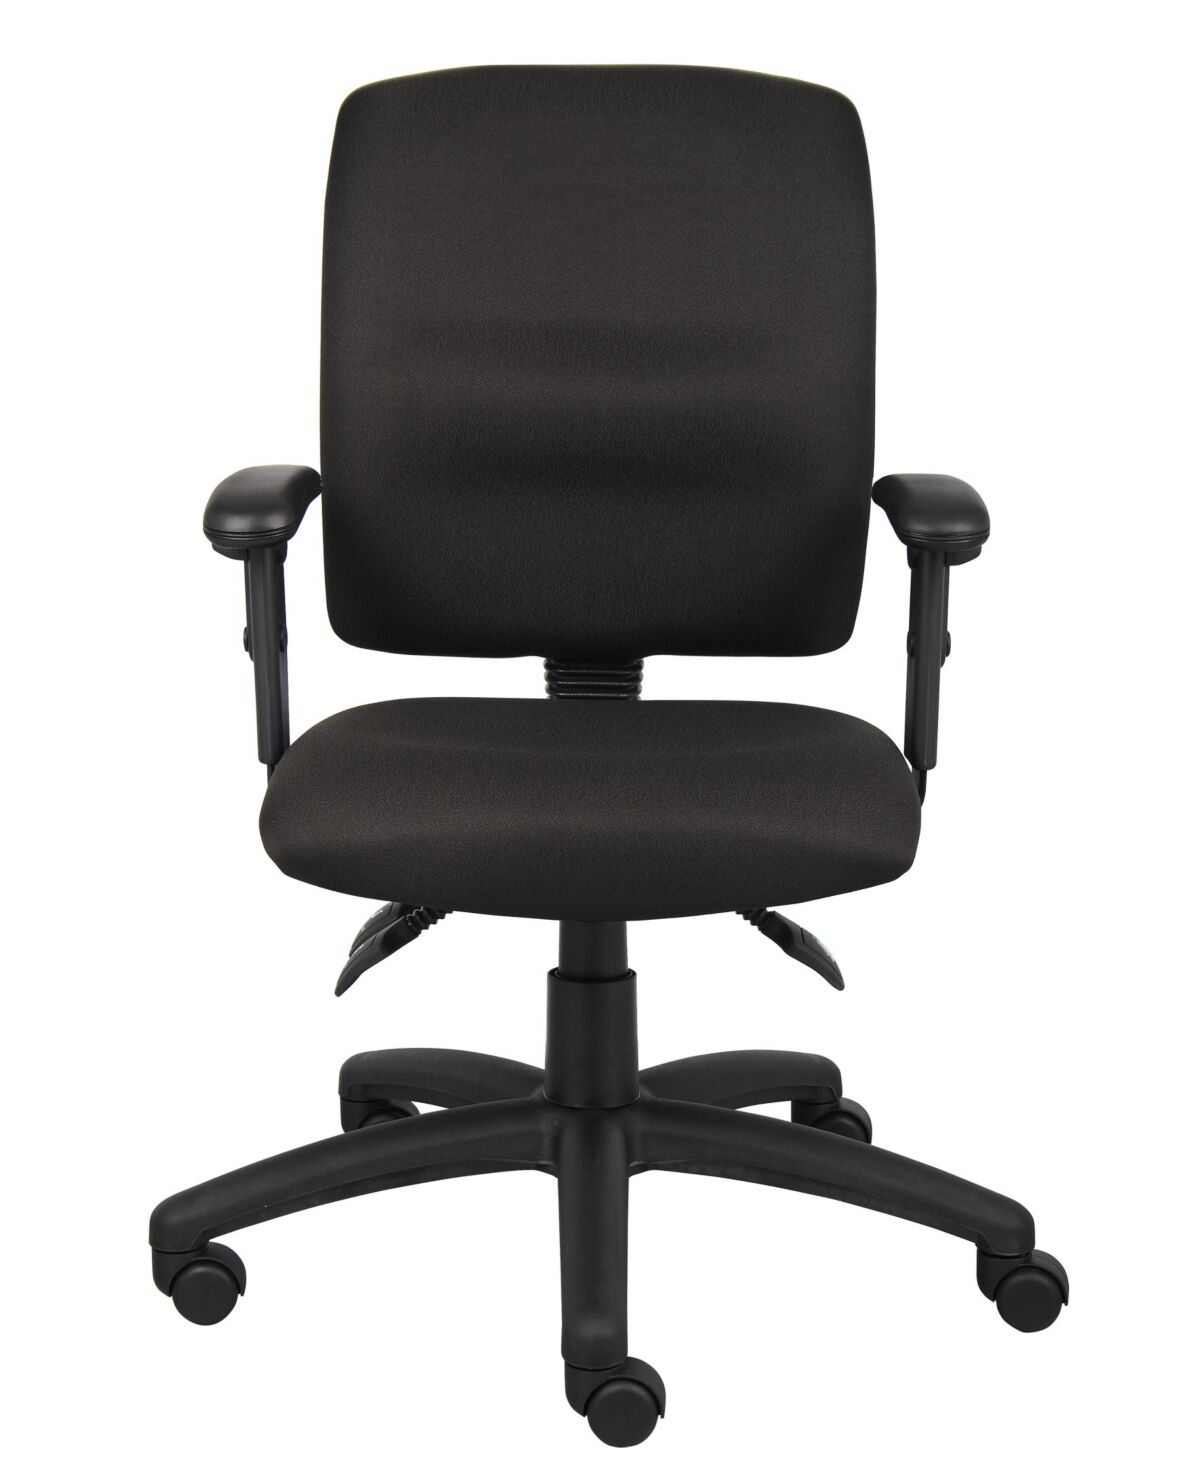 Boss Office Products Multi-Function Fabric Task Chair W/ Adjustable Arms - Black